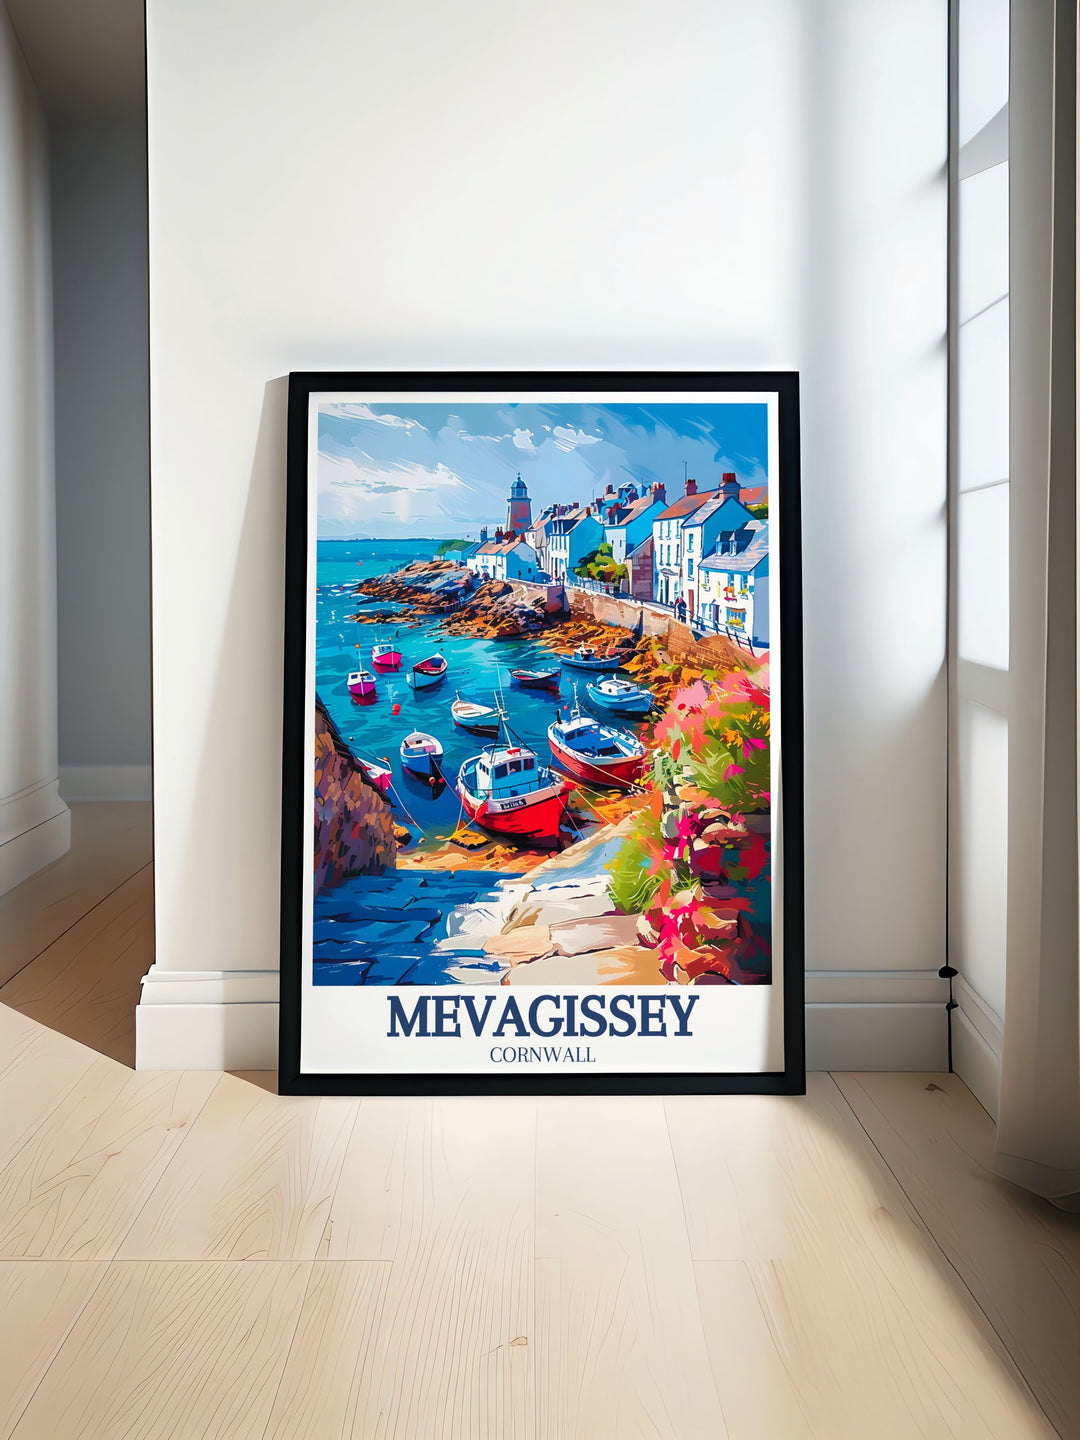 Highlighting the scenic and cultural vibrancy of Mevagissey, this poster captures the essence of this beloved Cornish village. Perfect for those who love picturesque coastal settings and rich history, this artwork brings the charm of Mevagissey into your home decor.